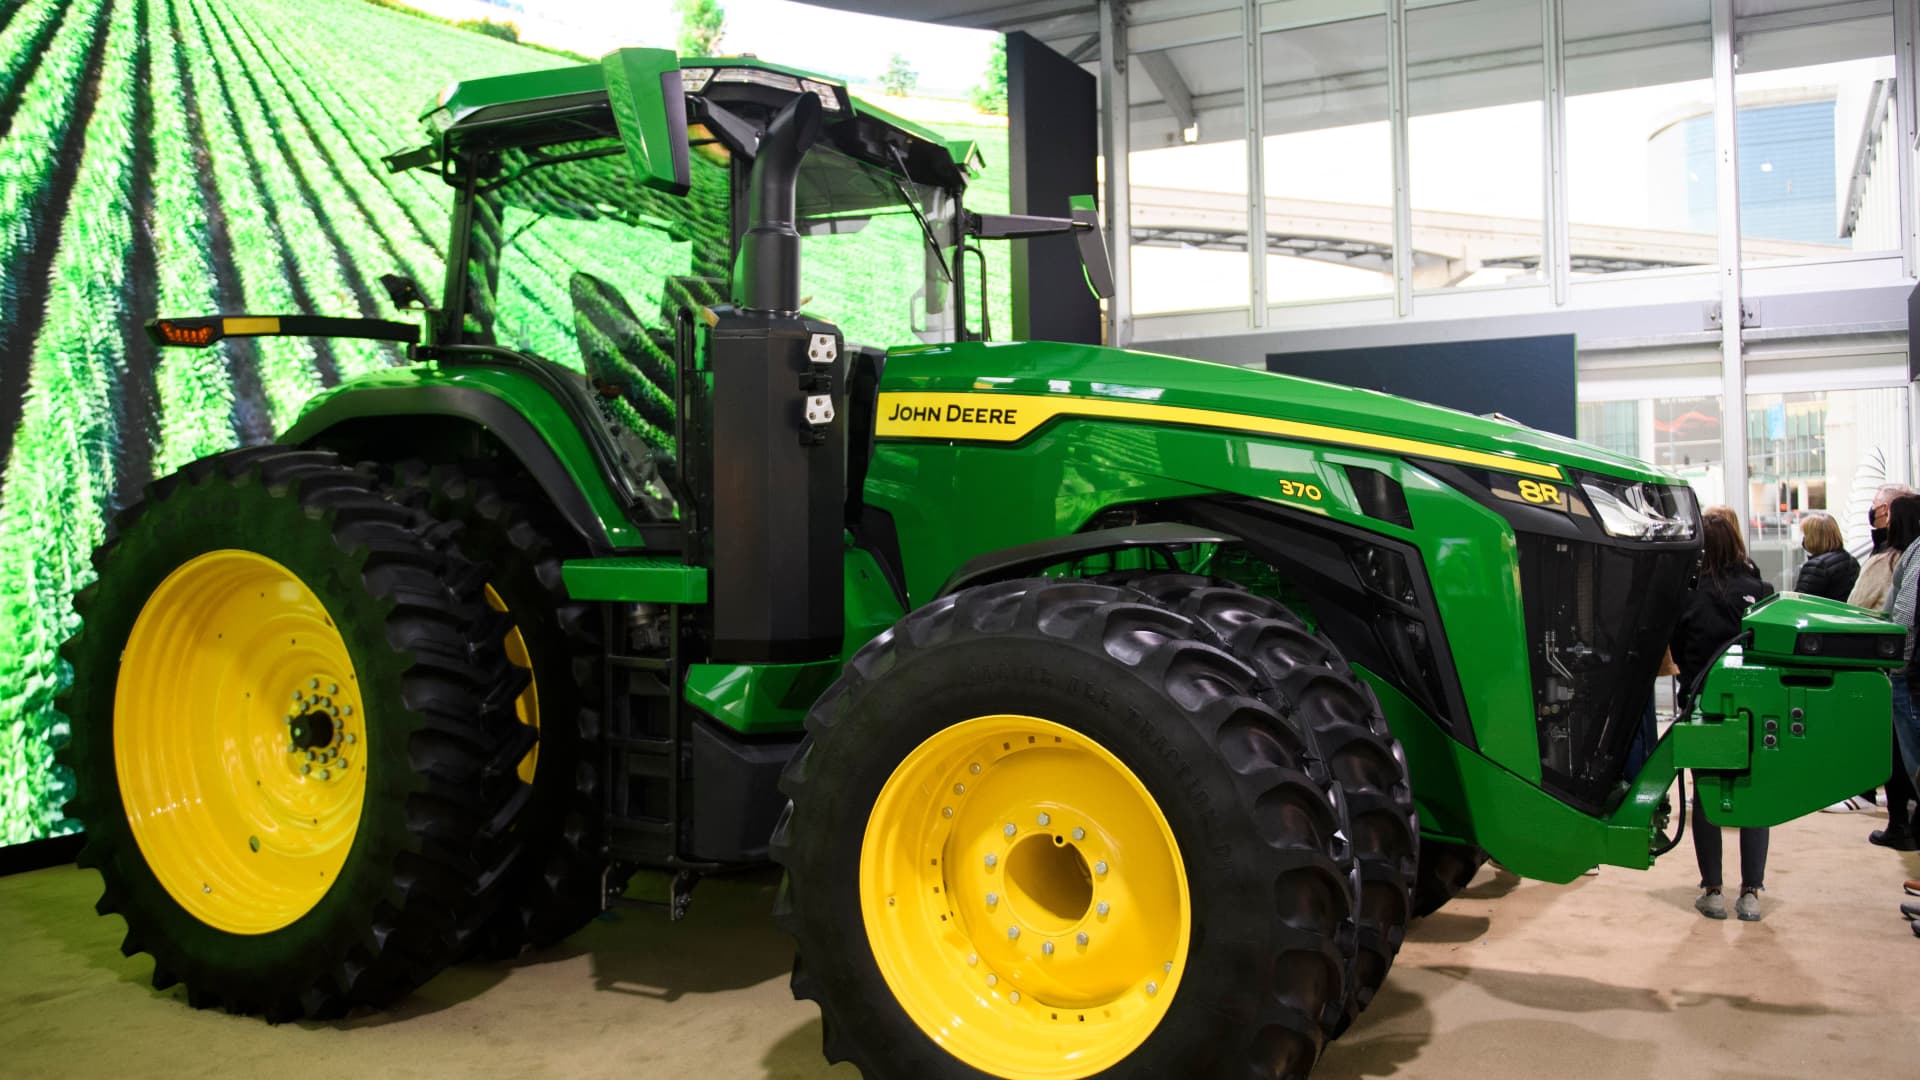 The Deer & Co. John Deere 8R fully autonomous tractor is displayed ahead of the Consumer Electronics Show (CES) on January 4, 2022 in Las Vegas, Nevada.